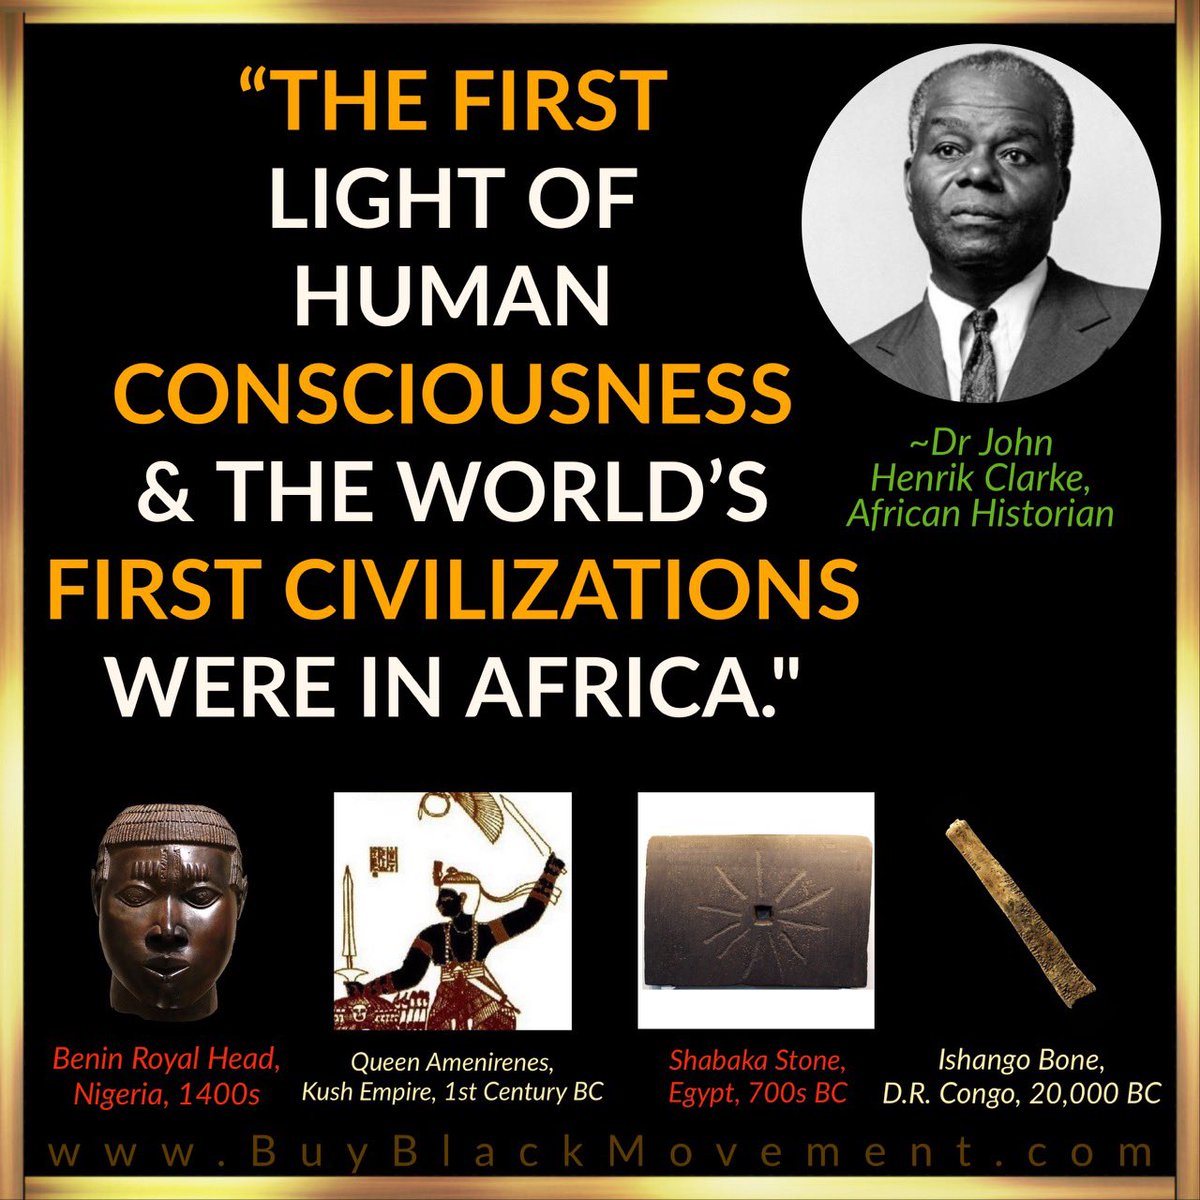 🌟So true! We can go from modern times back to ancient, & show that Black civilization has always been here. Thanks to Black historians, we can definitively say that civilization began in Africa. ❤️🖤💚Buy Black first at BuyBlackMovement.com #blackhistorymatters #africa